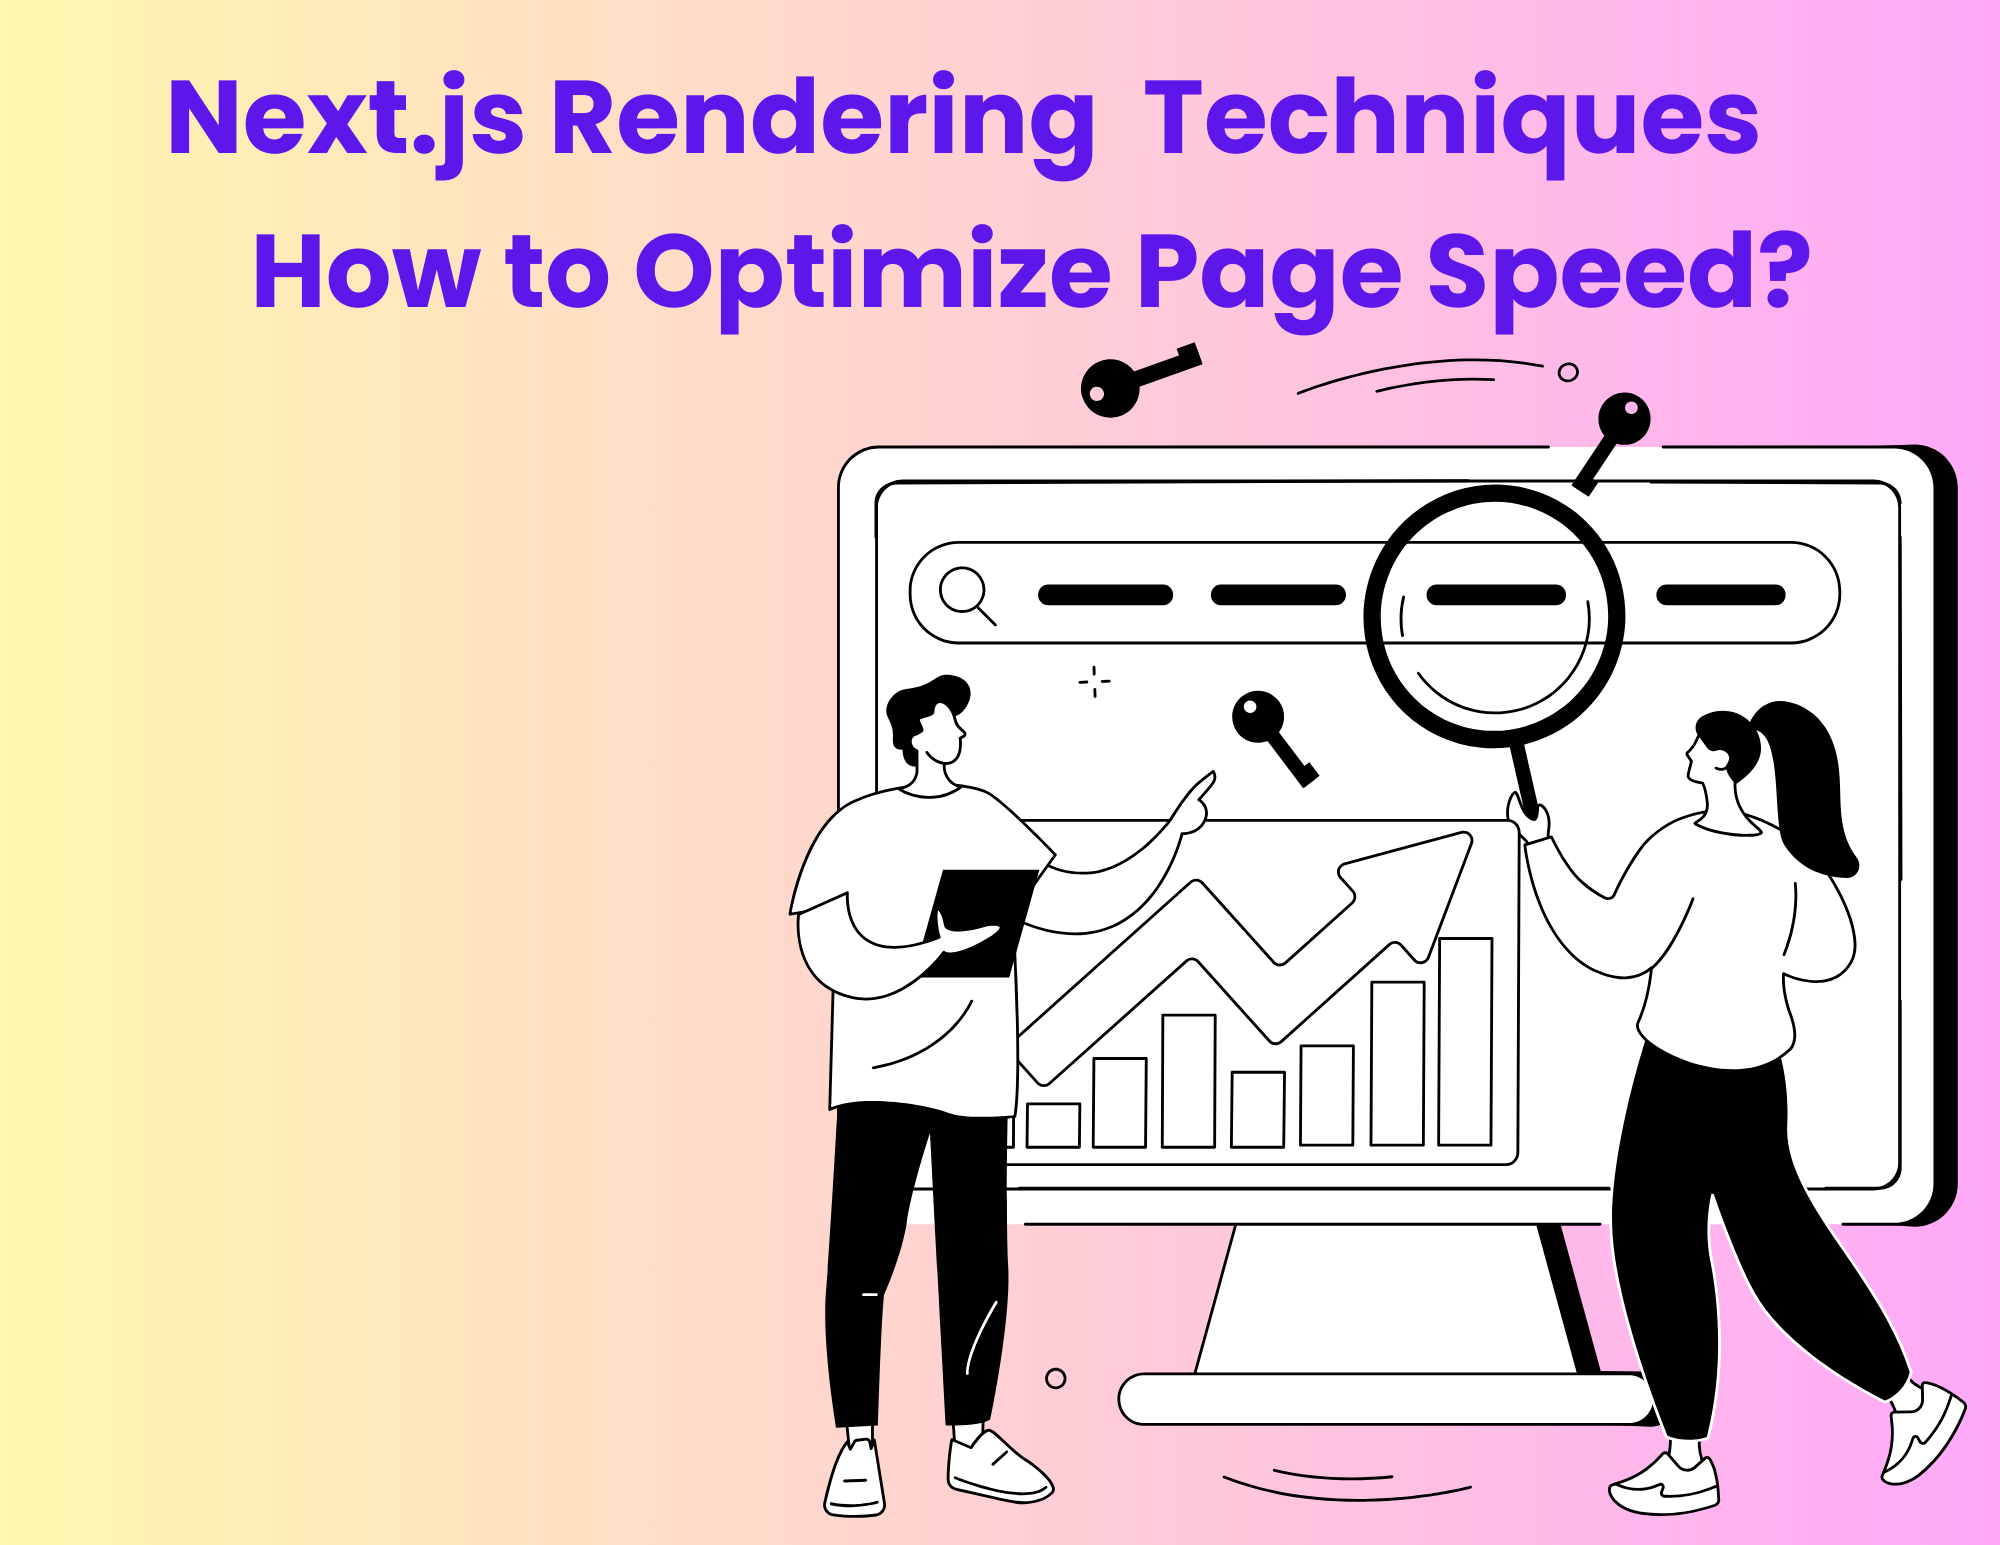 Next.js Rendering Techniques How to Optimize Page Speed